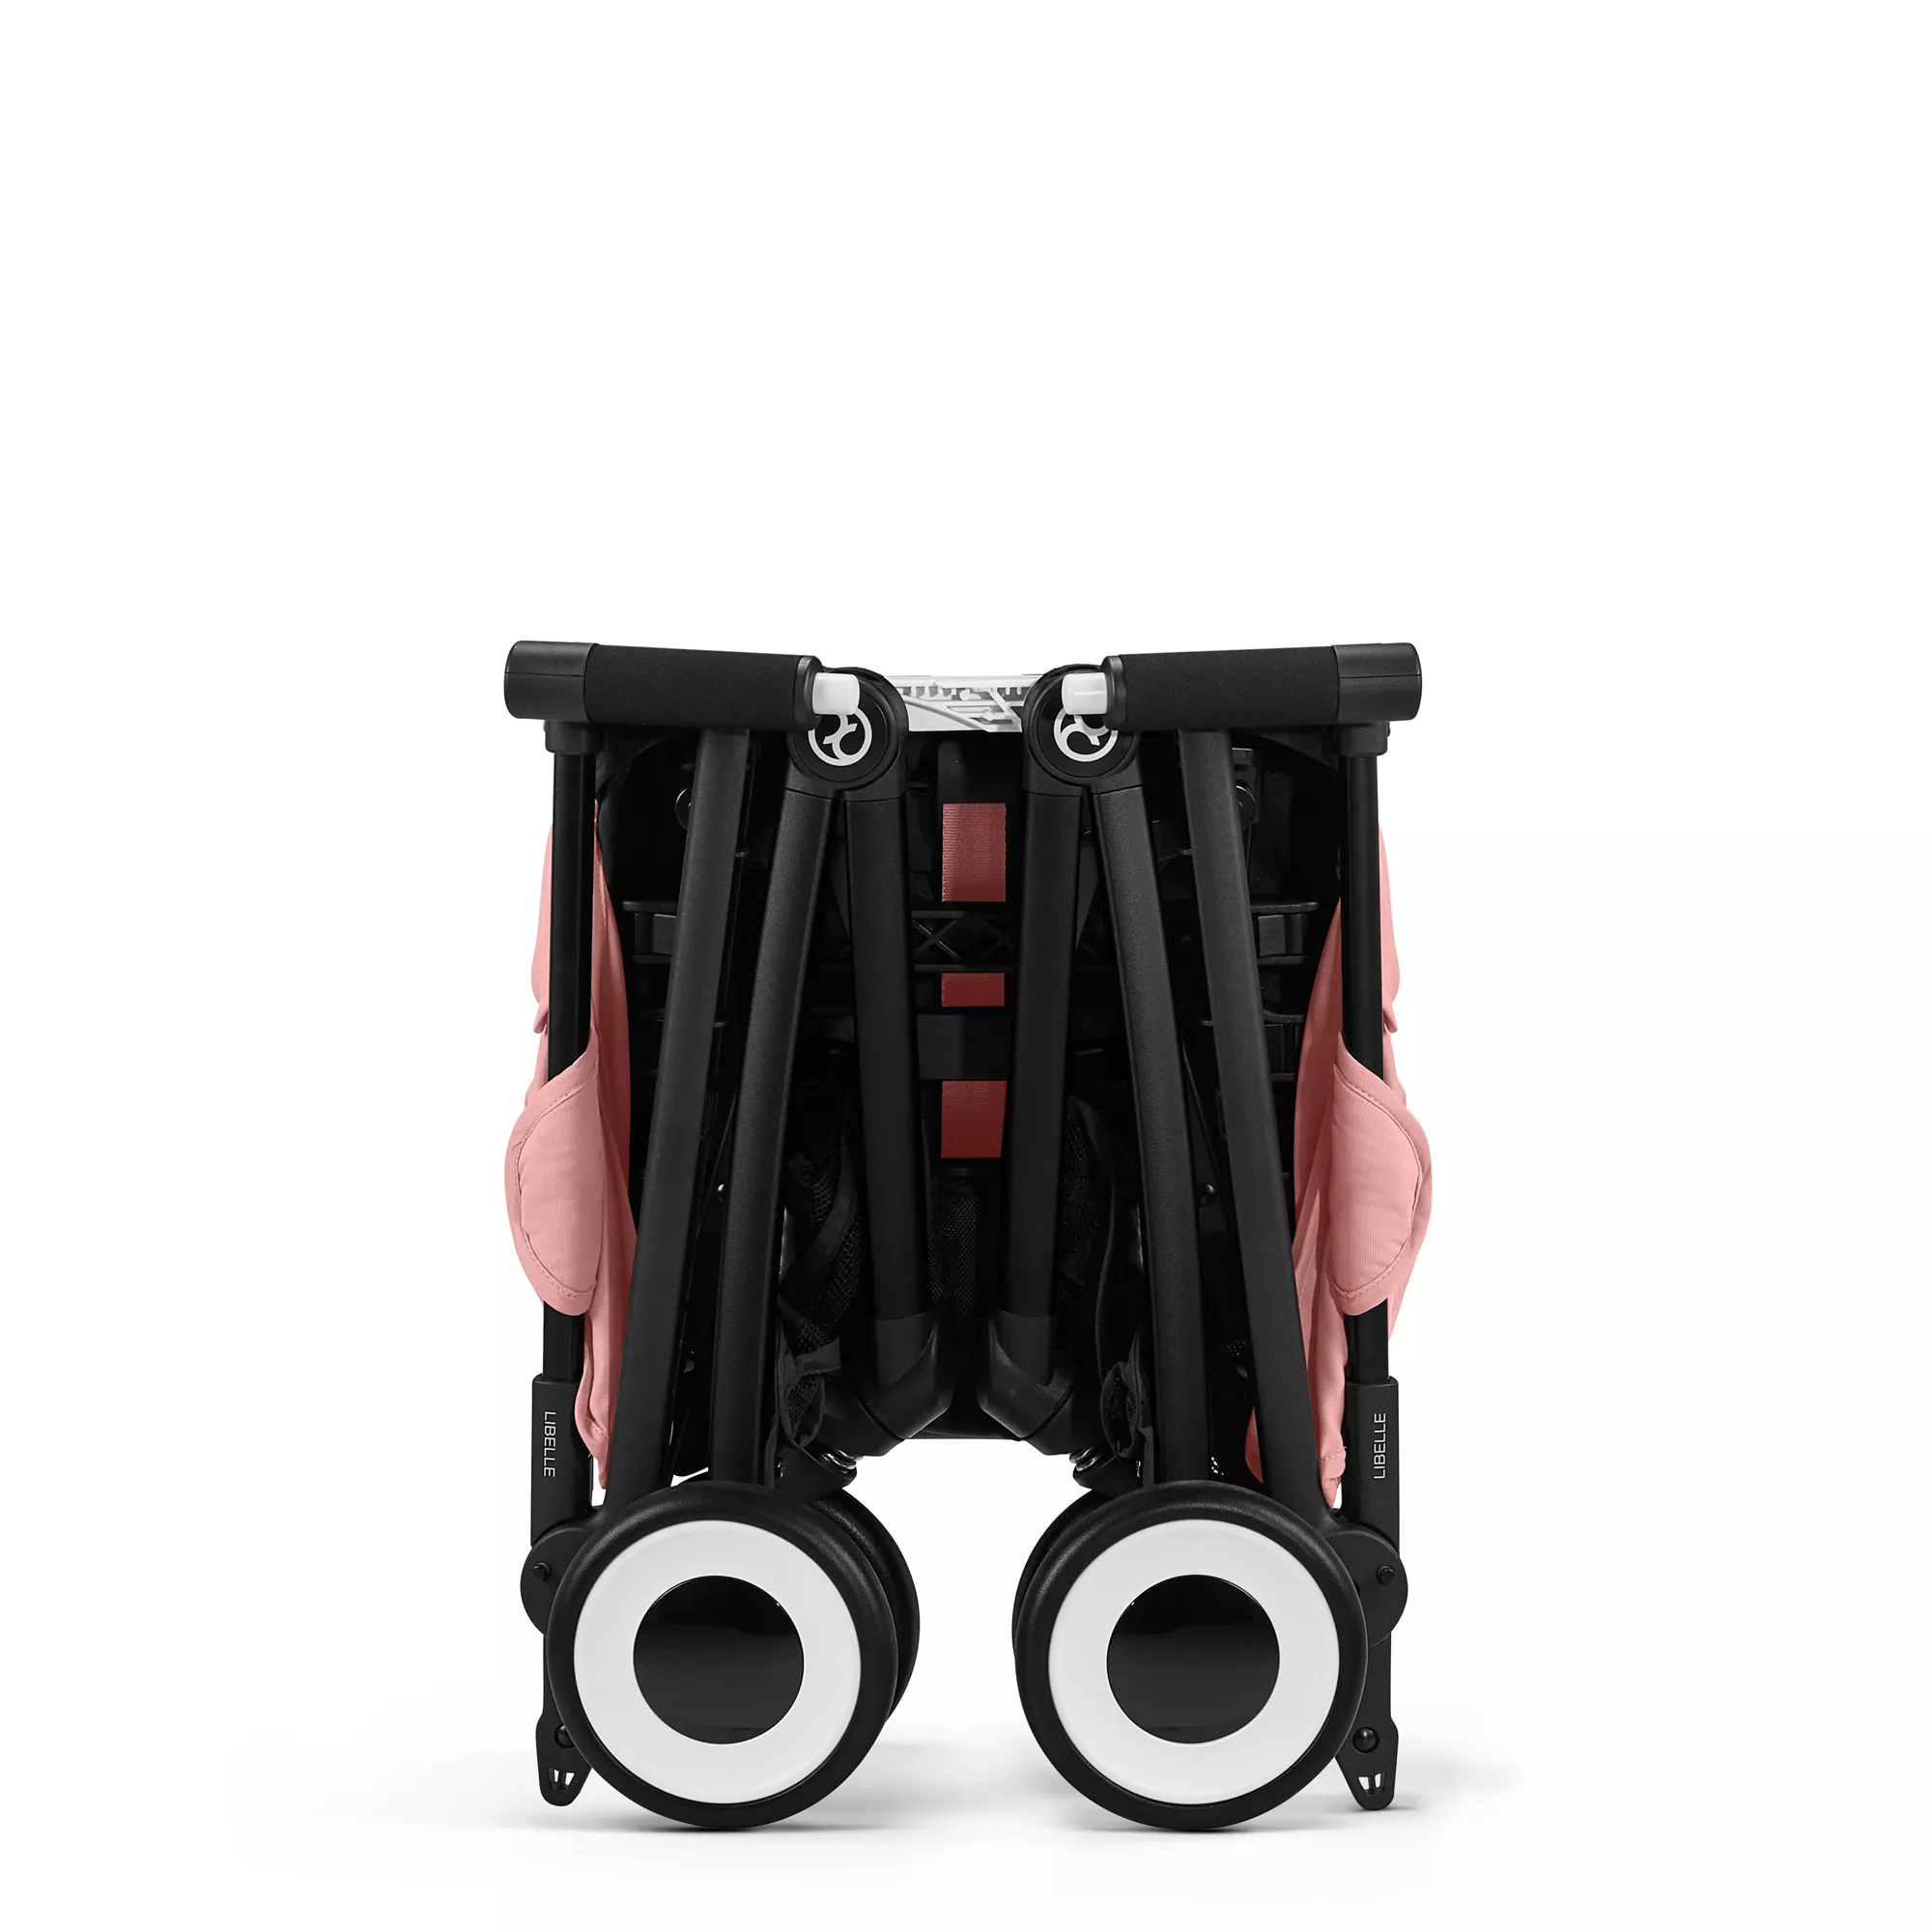 Cybex Libelle | Candy Pink